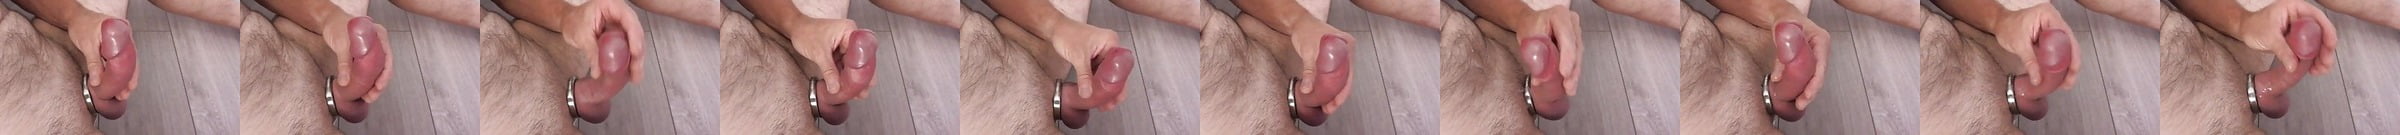 Thick Cock Dripping Thick Cum Video Free Gay Hd Porn Ef 